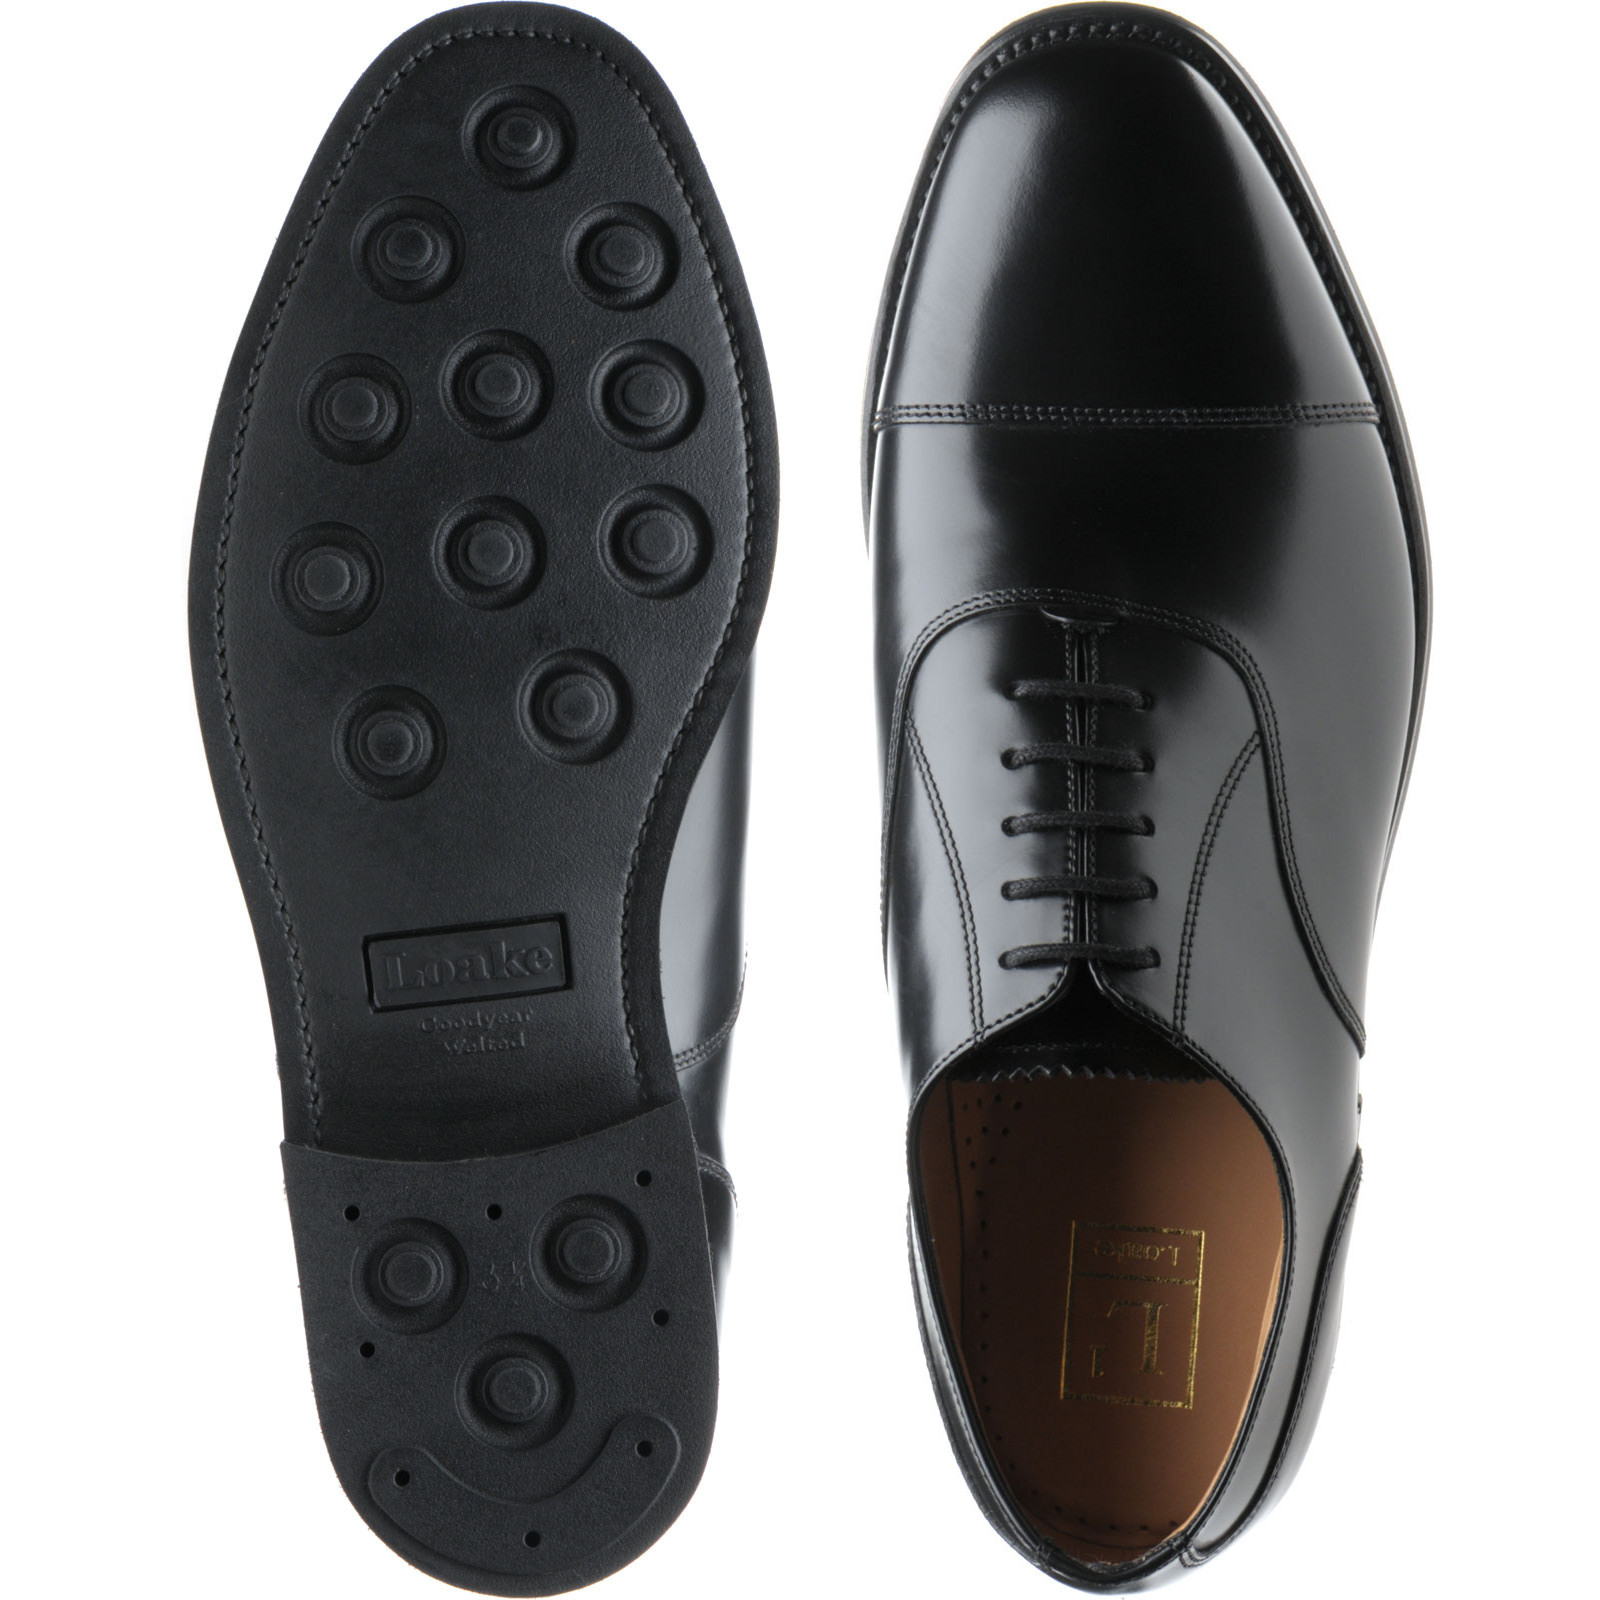 Loake shoes | Loake Professional | 300 rubber-soled Oxfords in Black ...